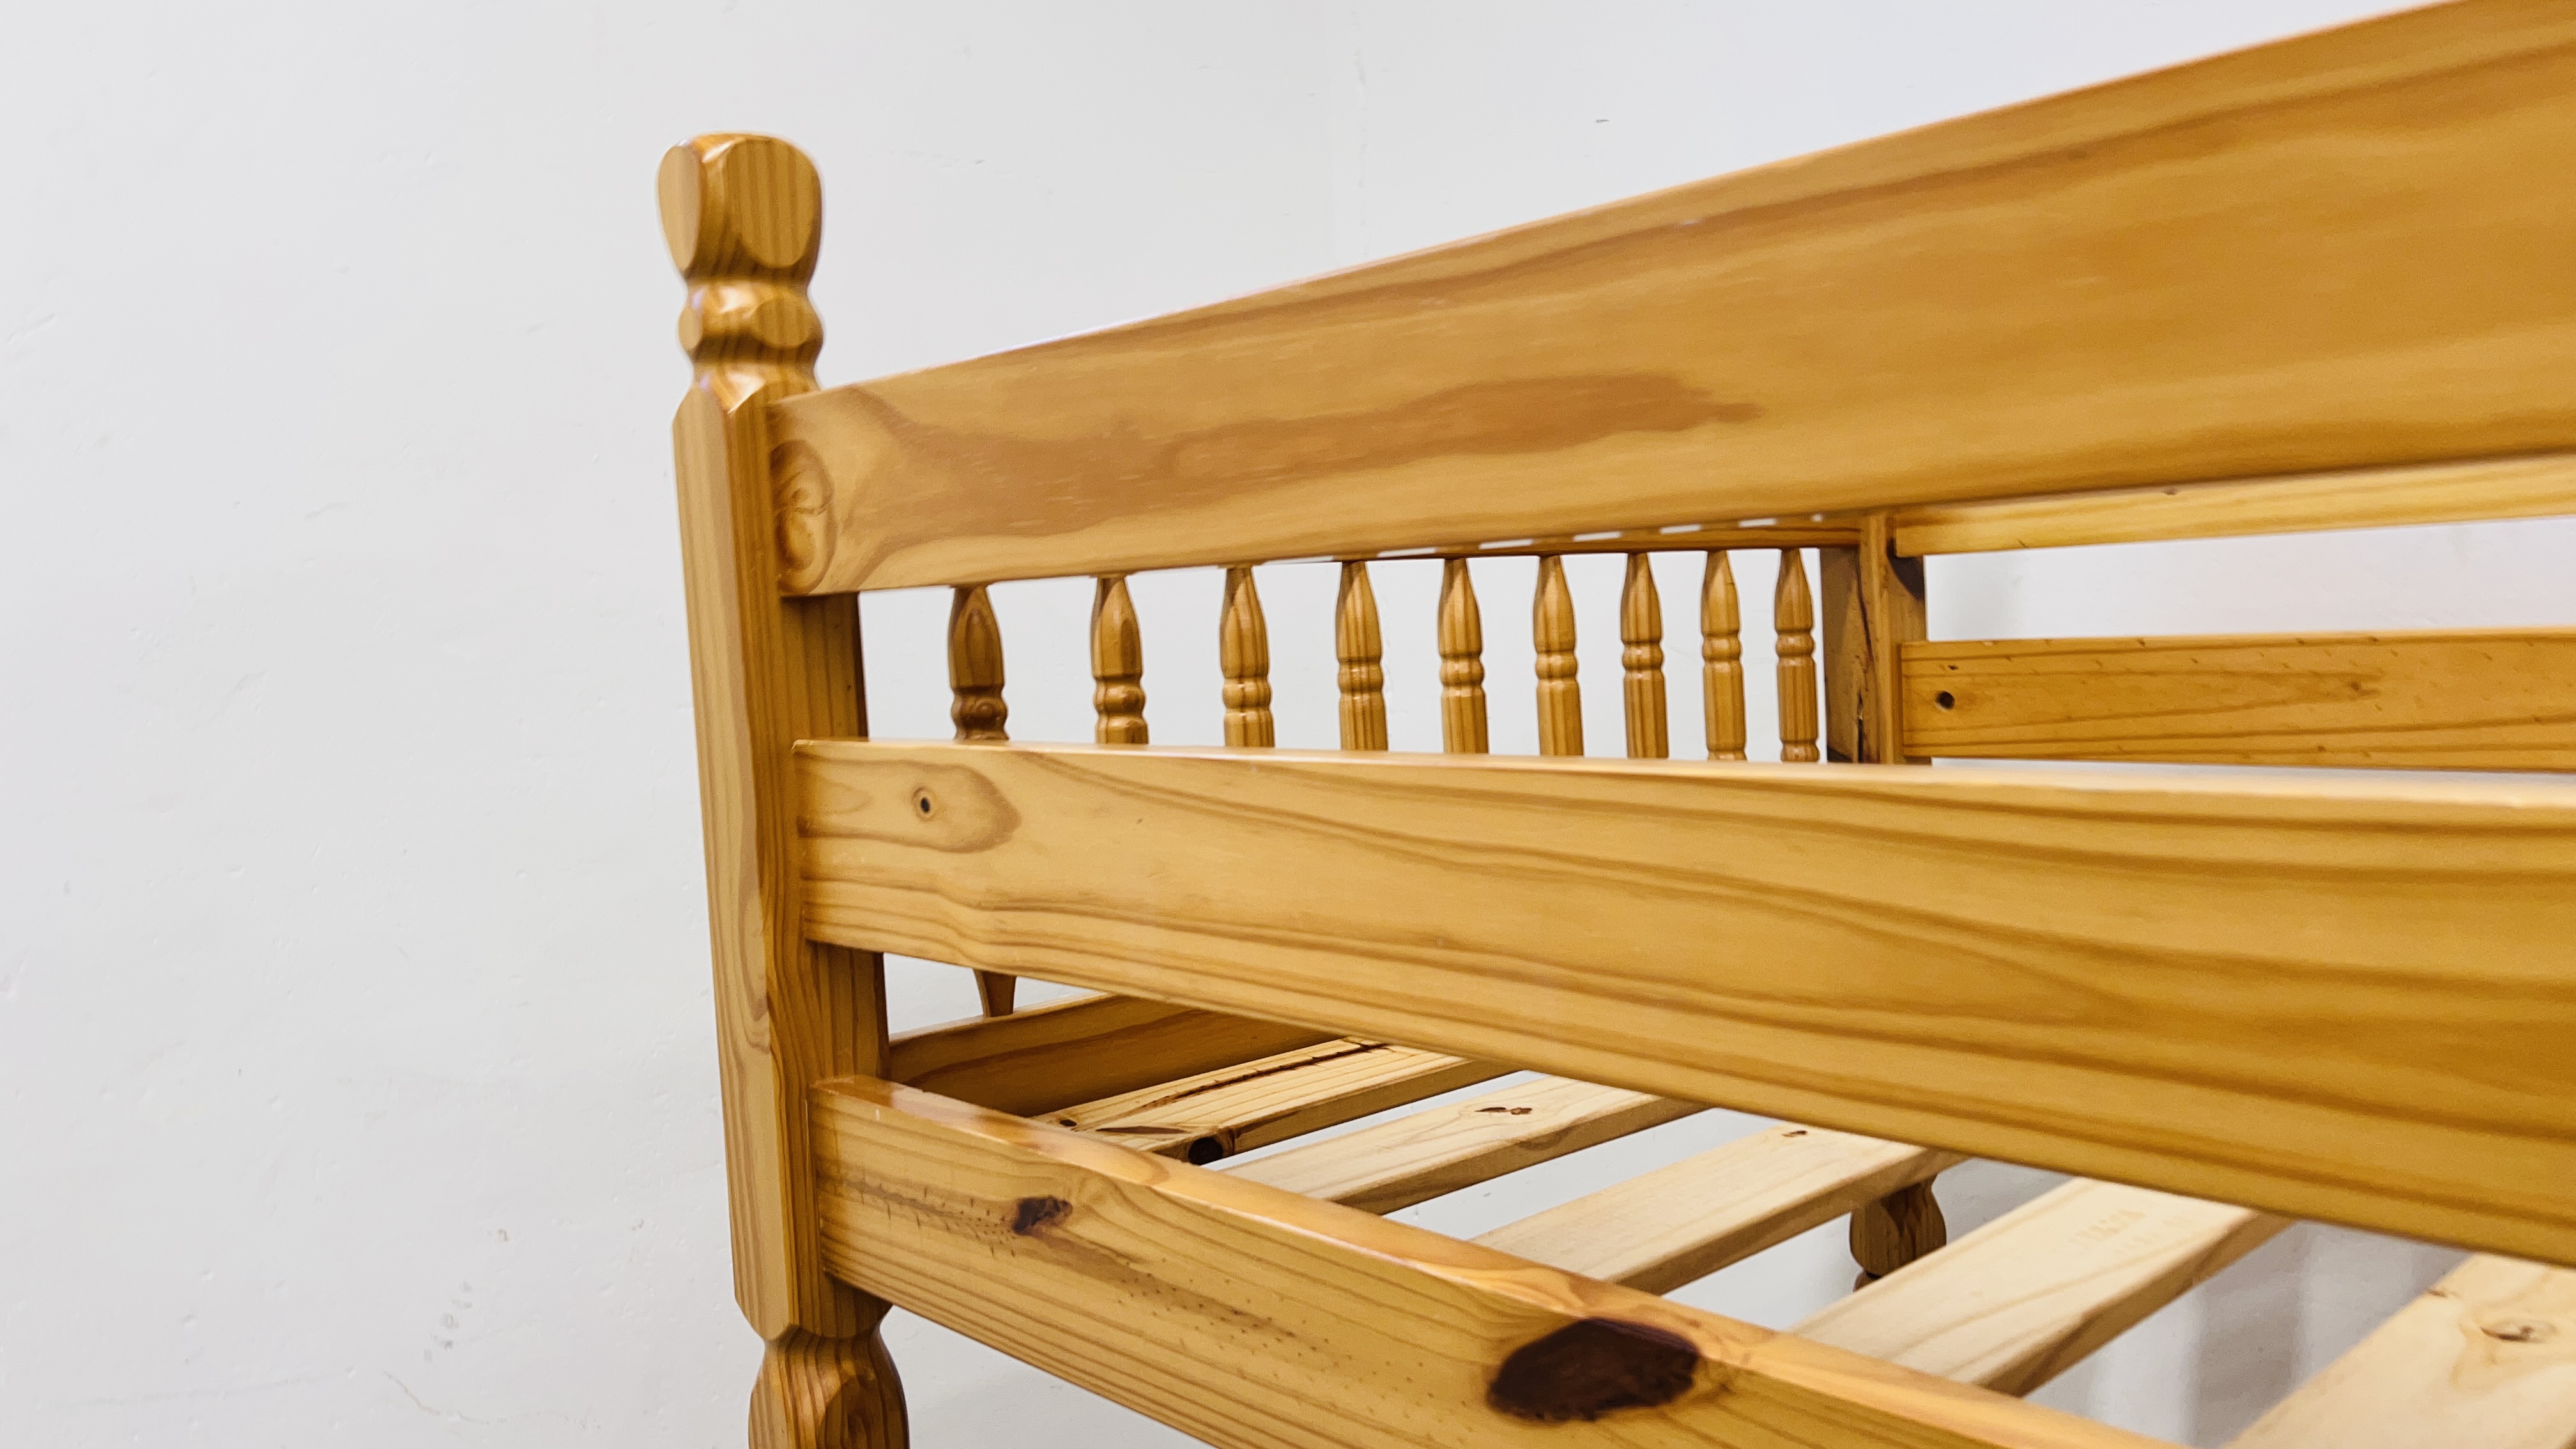 A PINE FRAME BUNK BED - Image 9 of 11